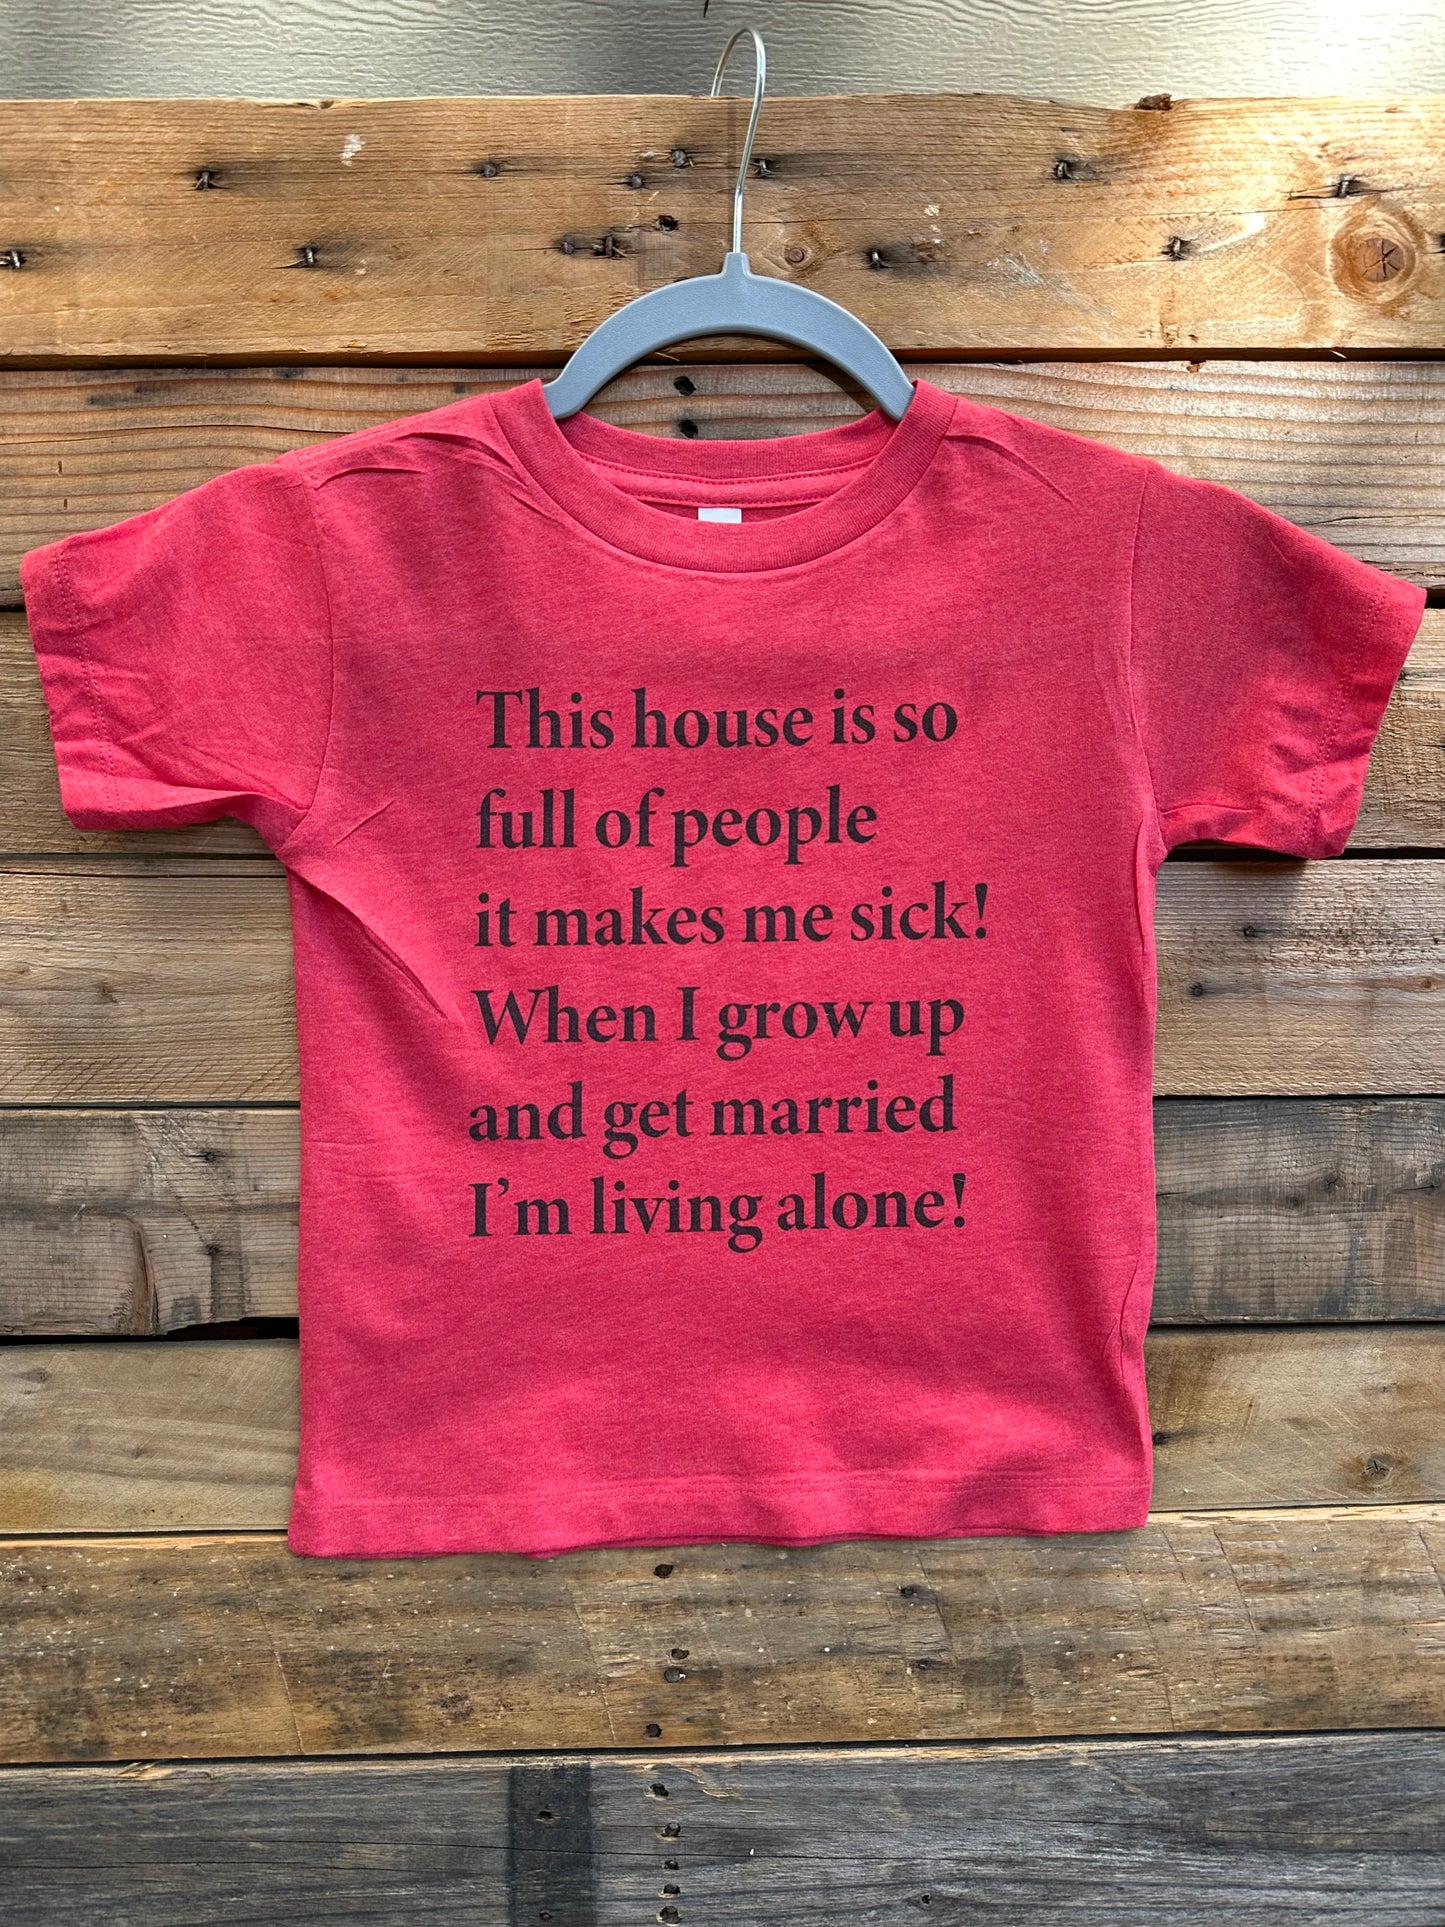 Family Home Alone Shirts